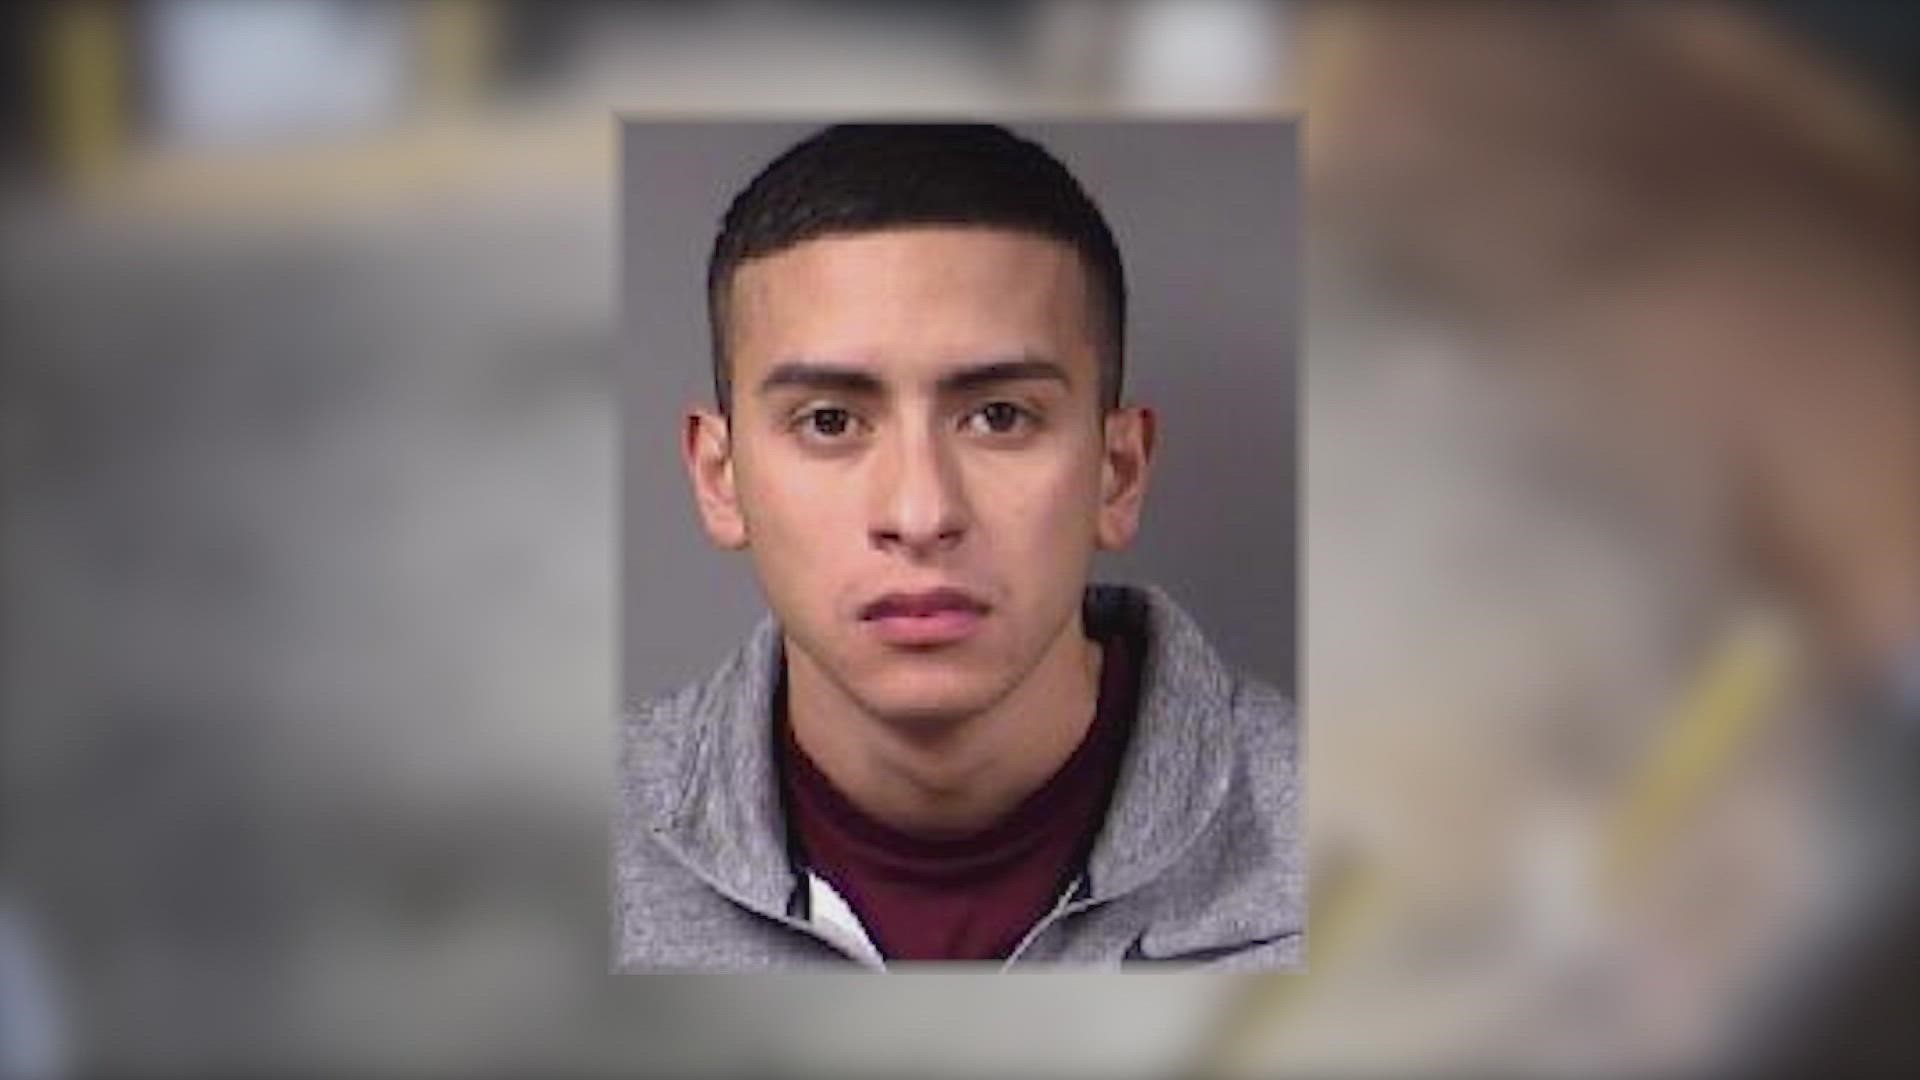 Police recently identified the suspect as 23-year-old Abel Gallegos and said he is on the run.